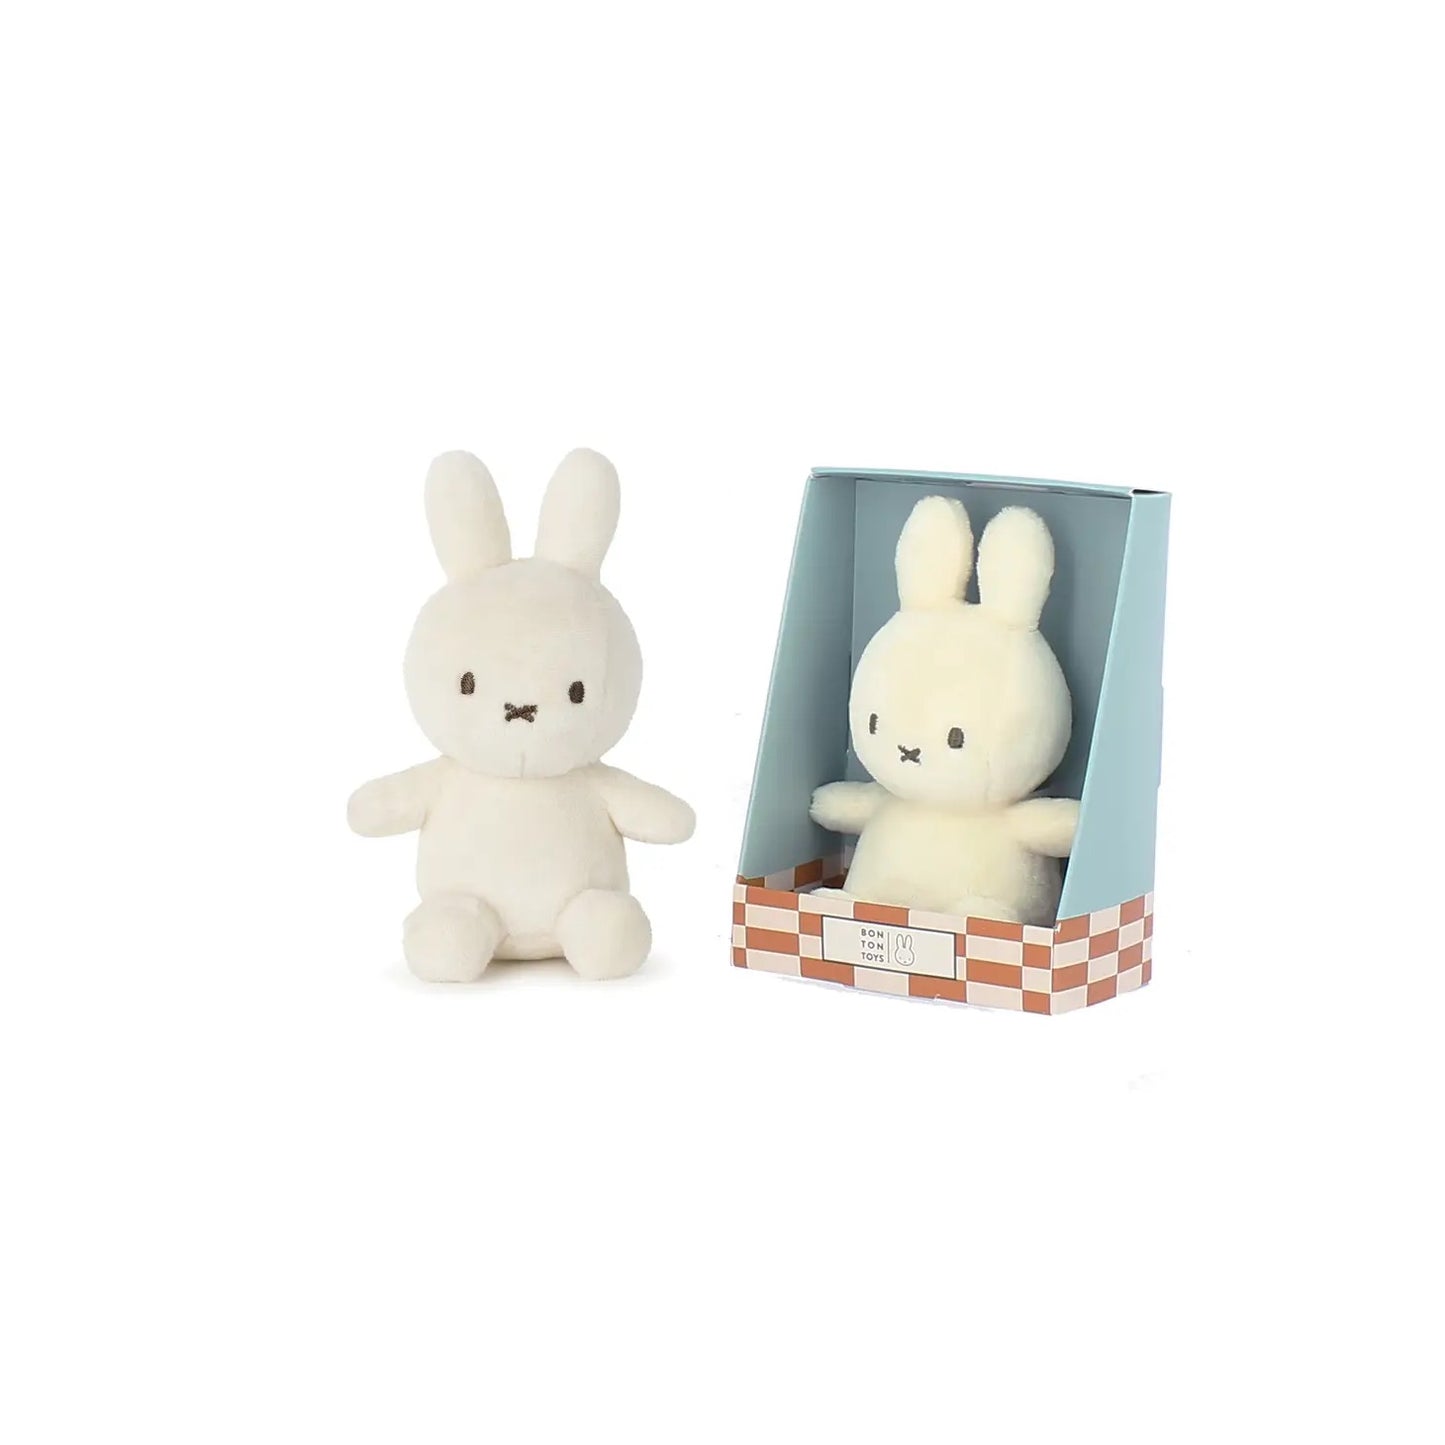 Miffy Lucky Charm in Giftbox 10cm available in cream or grey